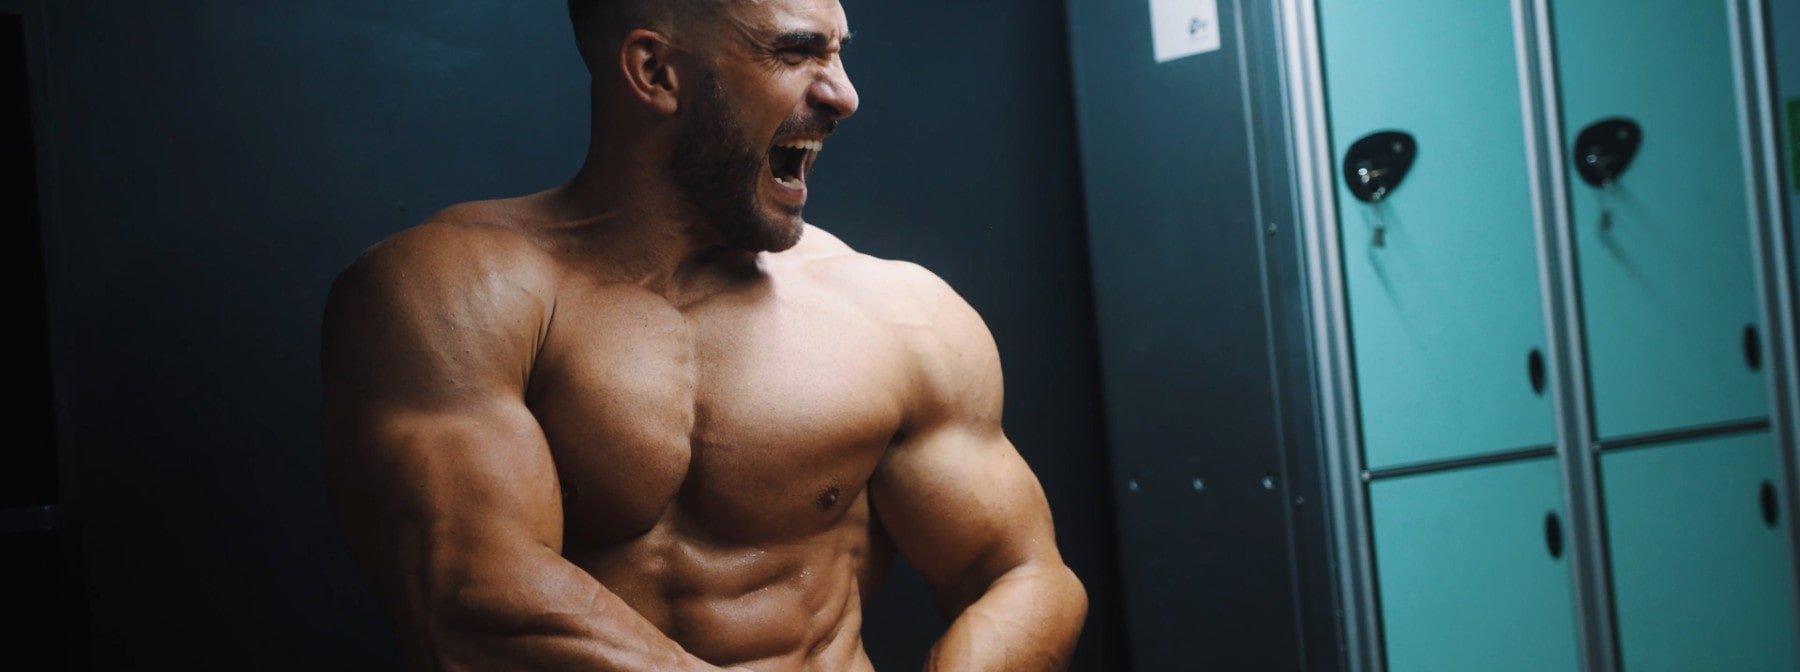 Ryan Terry ‘Determined’ To Claim Olympia Crown After Arnold Classic Win